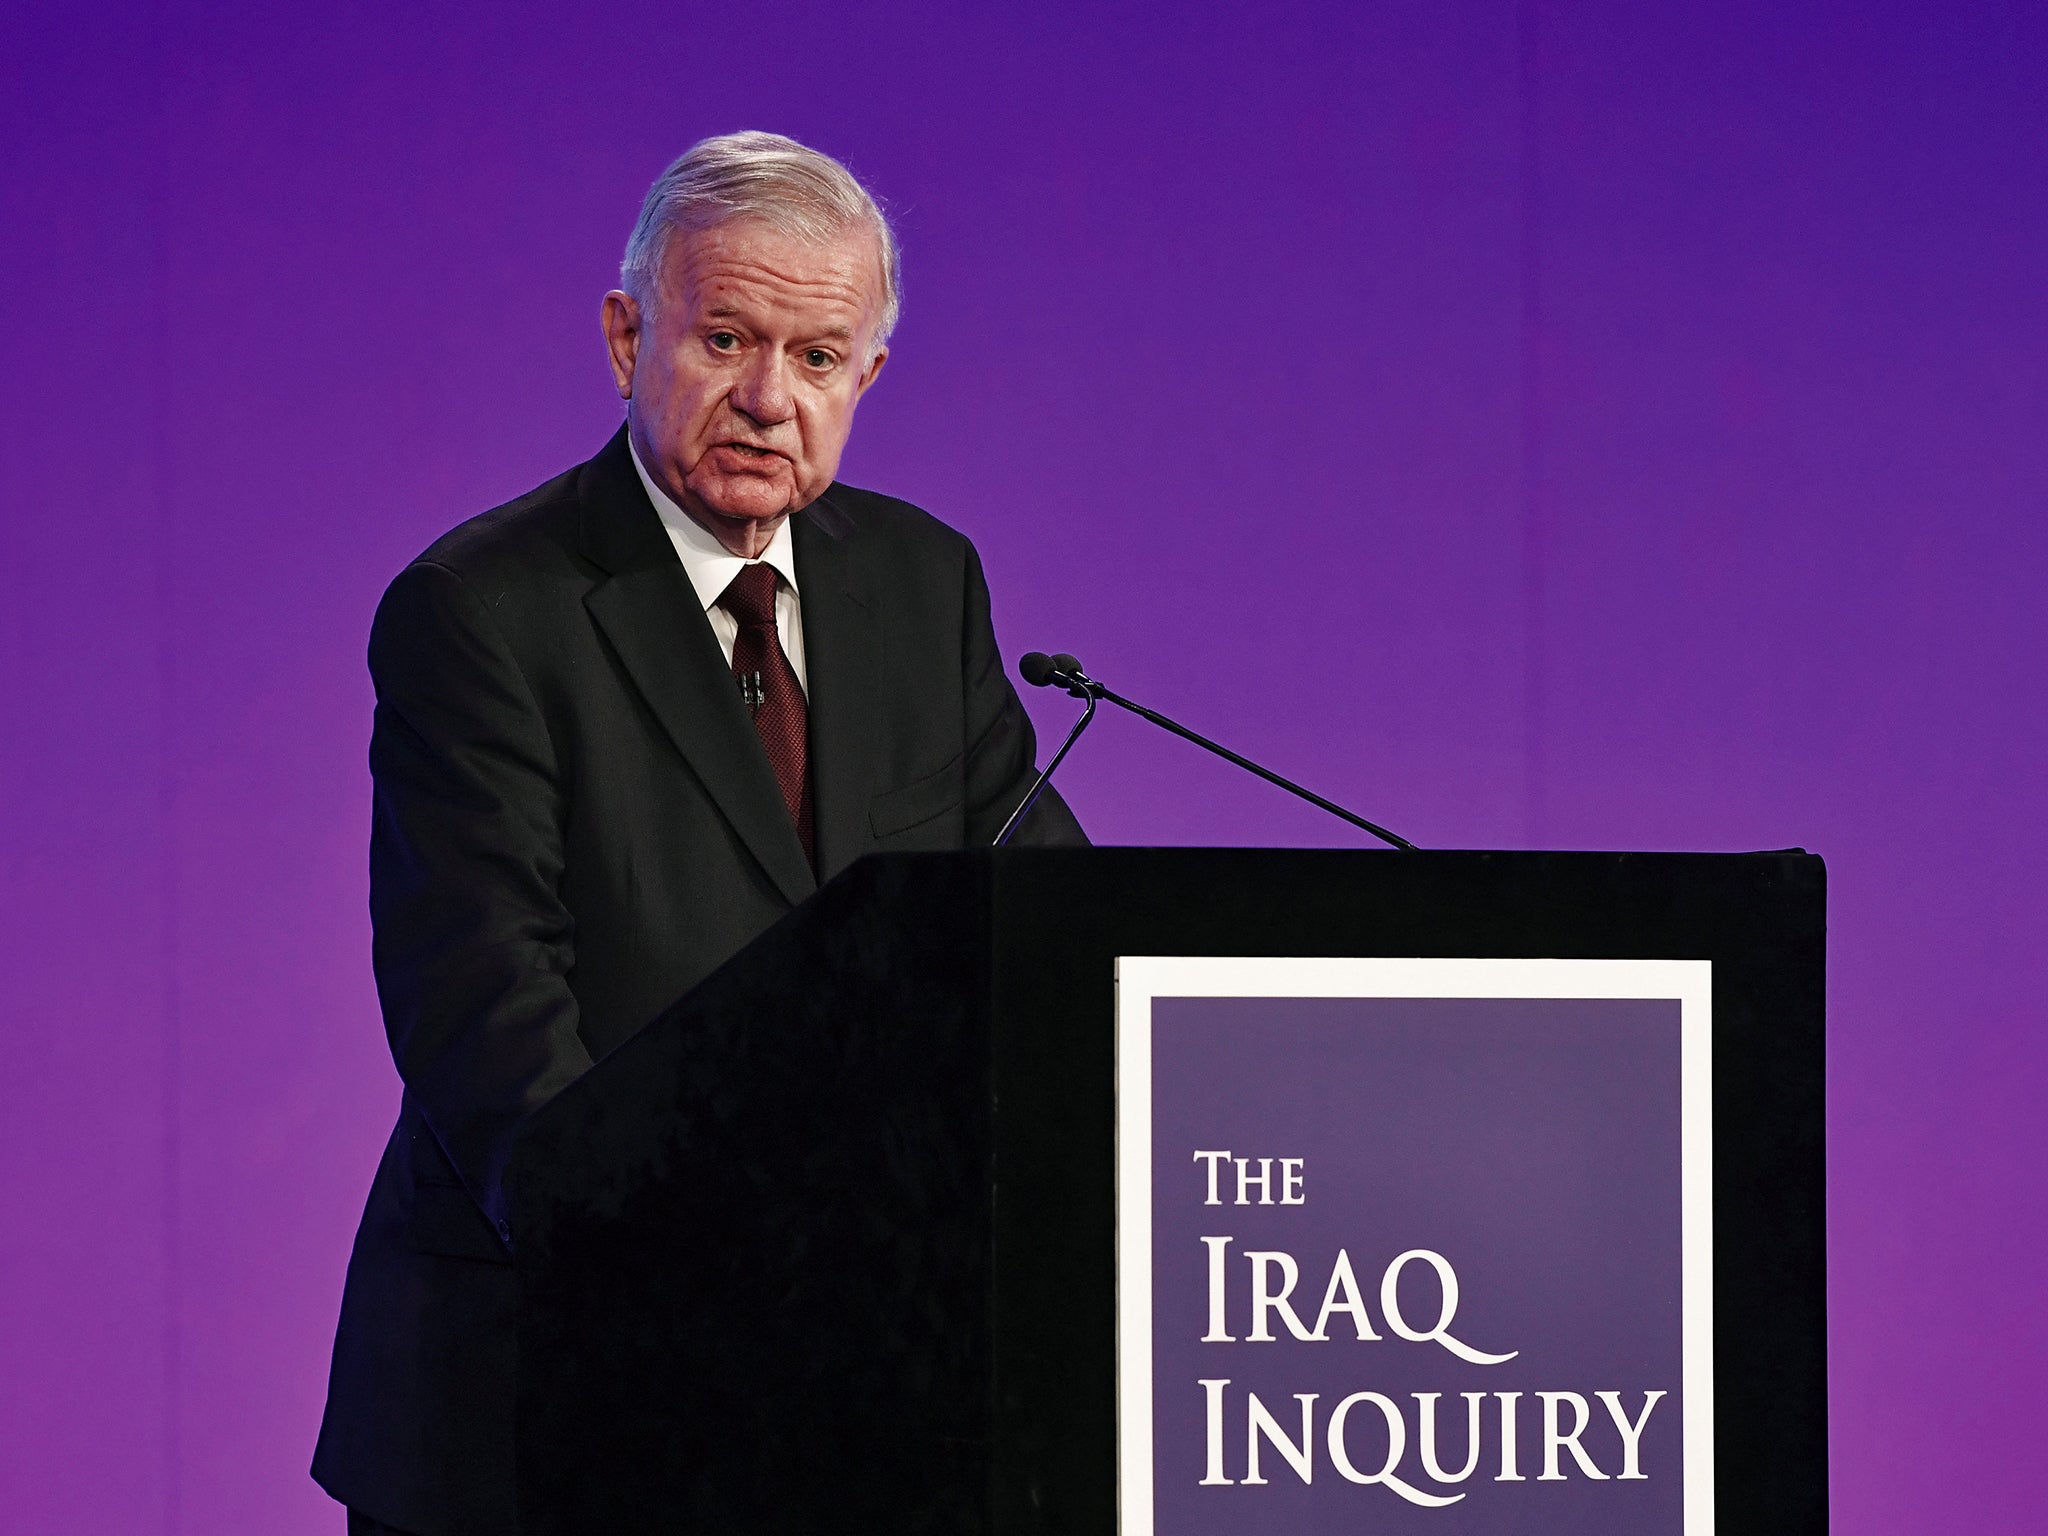 Sir John Chilcot found Tony Blair presented the case for war with 'a certainty which was not justified'